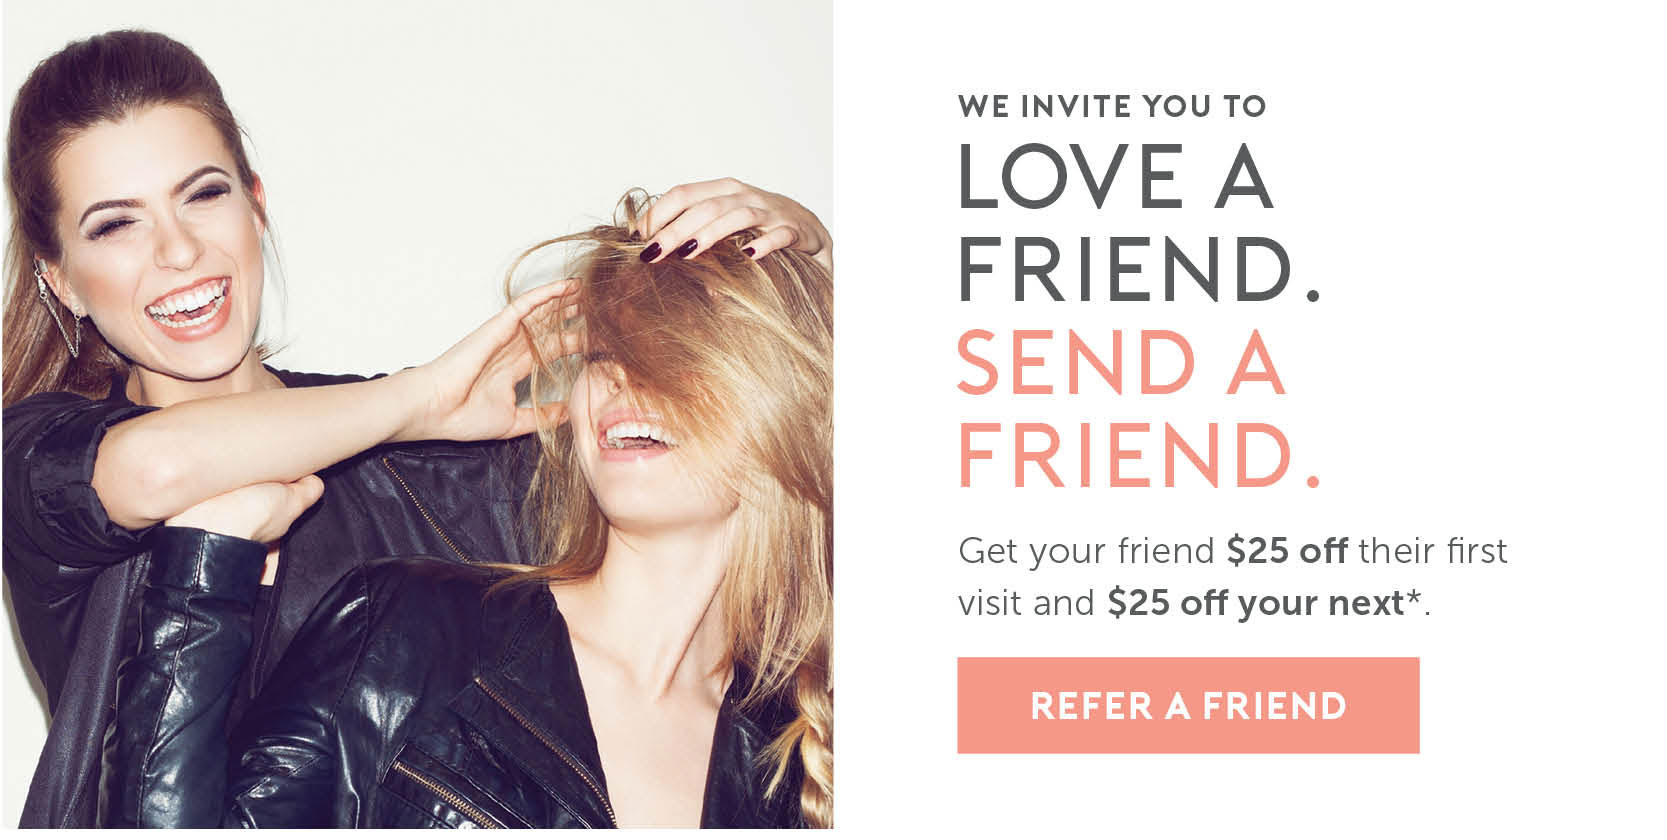 We invite you to love a friend. Send a friend. Get your friend $25 off their first visit and $25 off your next*. Click here to refer a friend. 